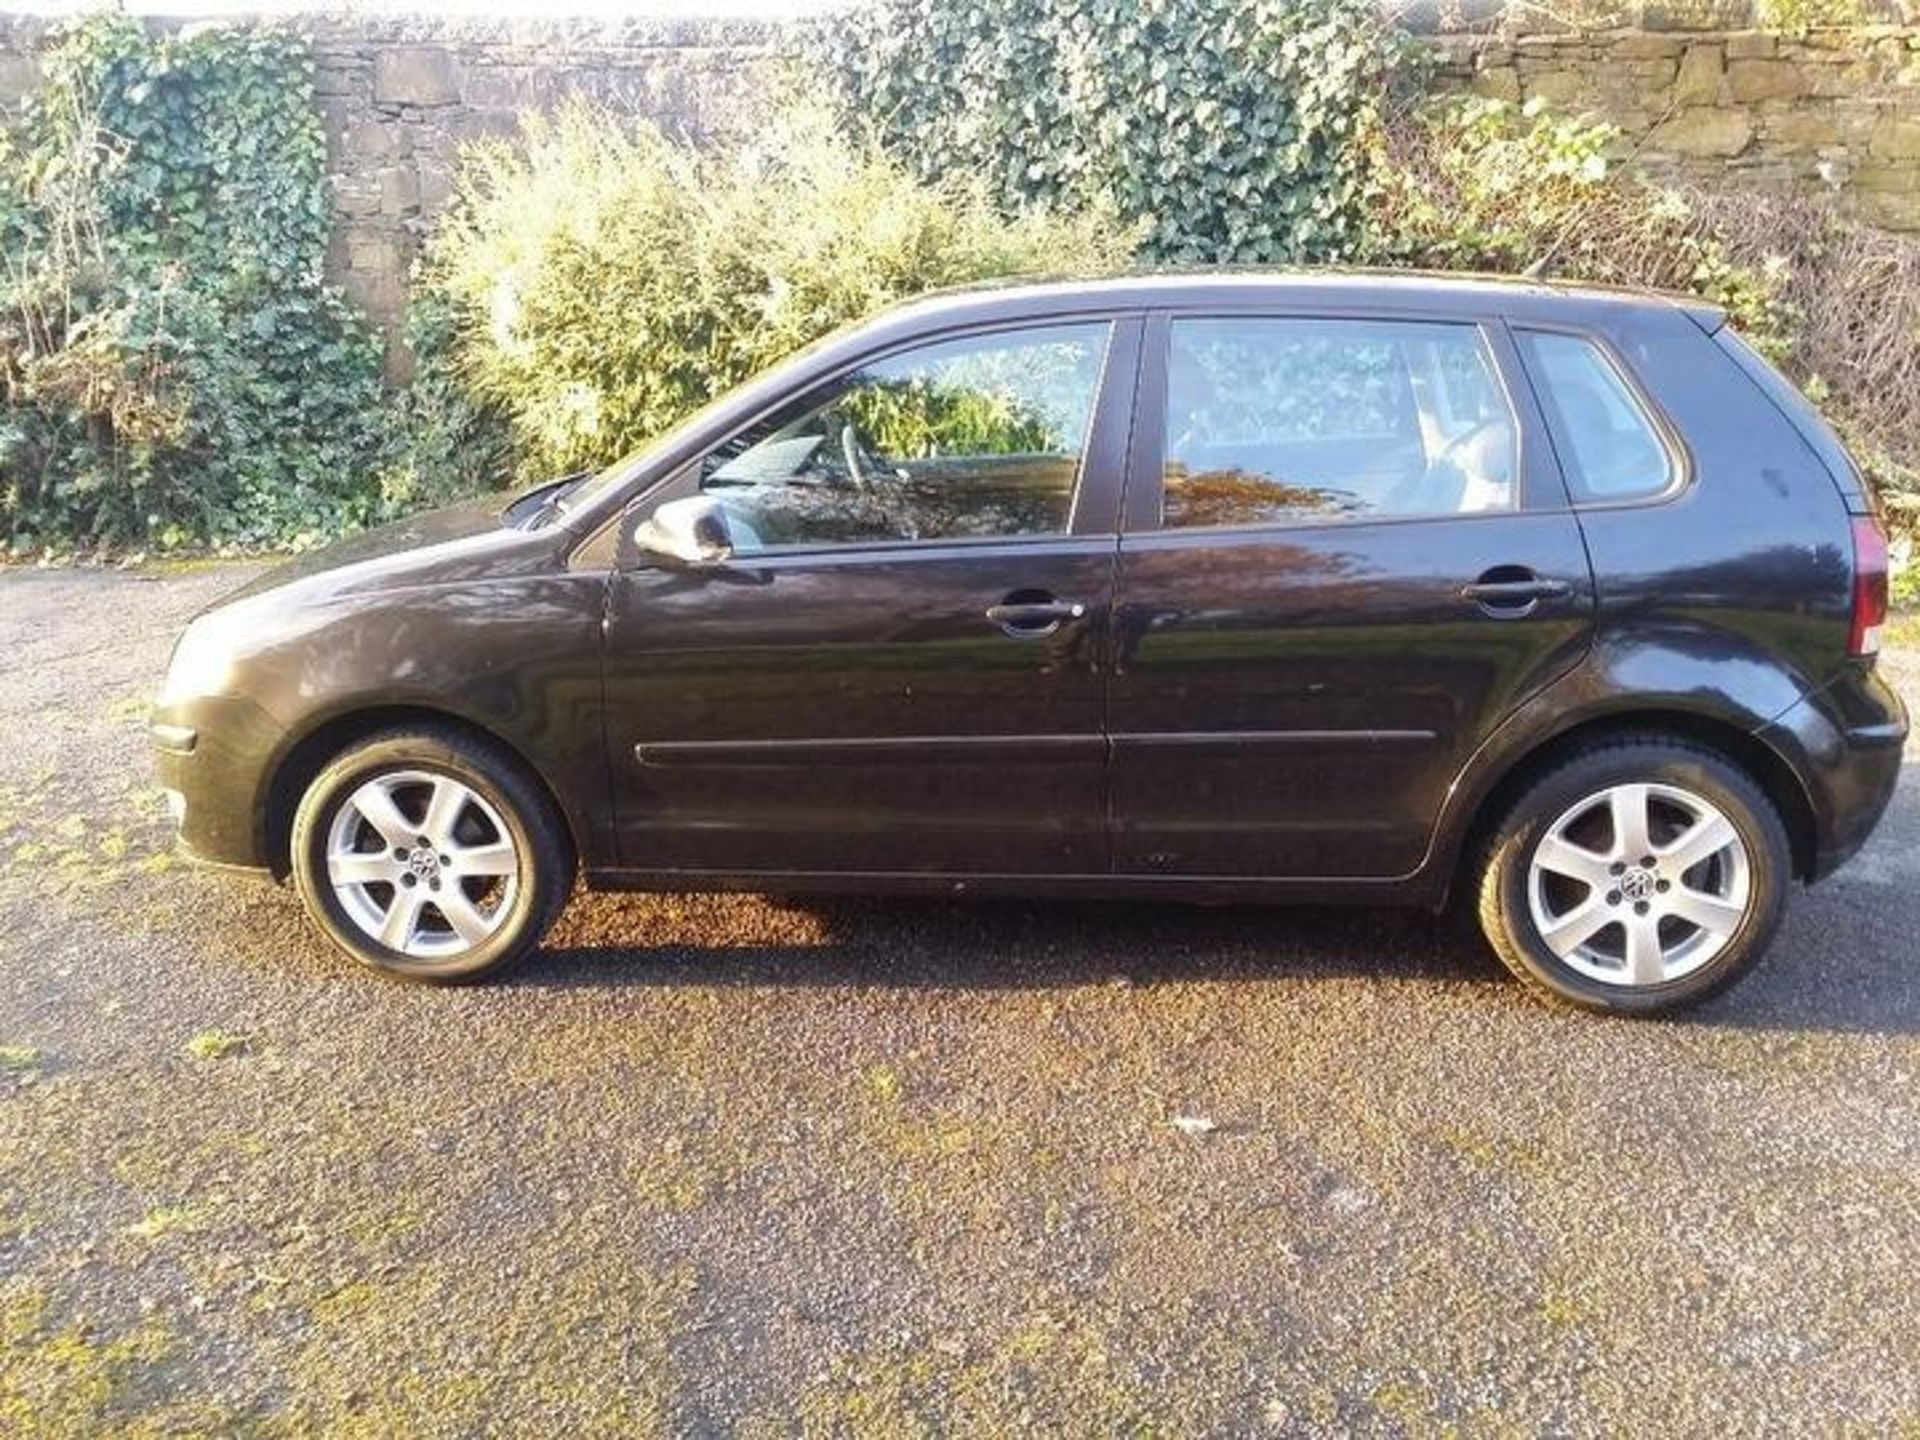 VOLKSWAGEN, POLO 1-2 MATCH, AB08 SYJ, 1-2 LTR, PETROL, MANUAL, 4 DOOR HATCH, 06.06.2008, CURRENT - Image 8 of 16